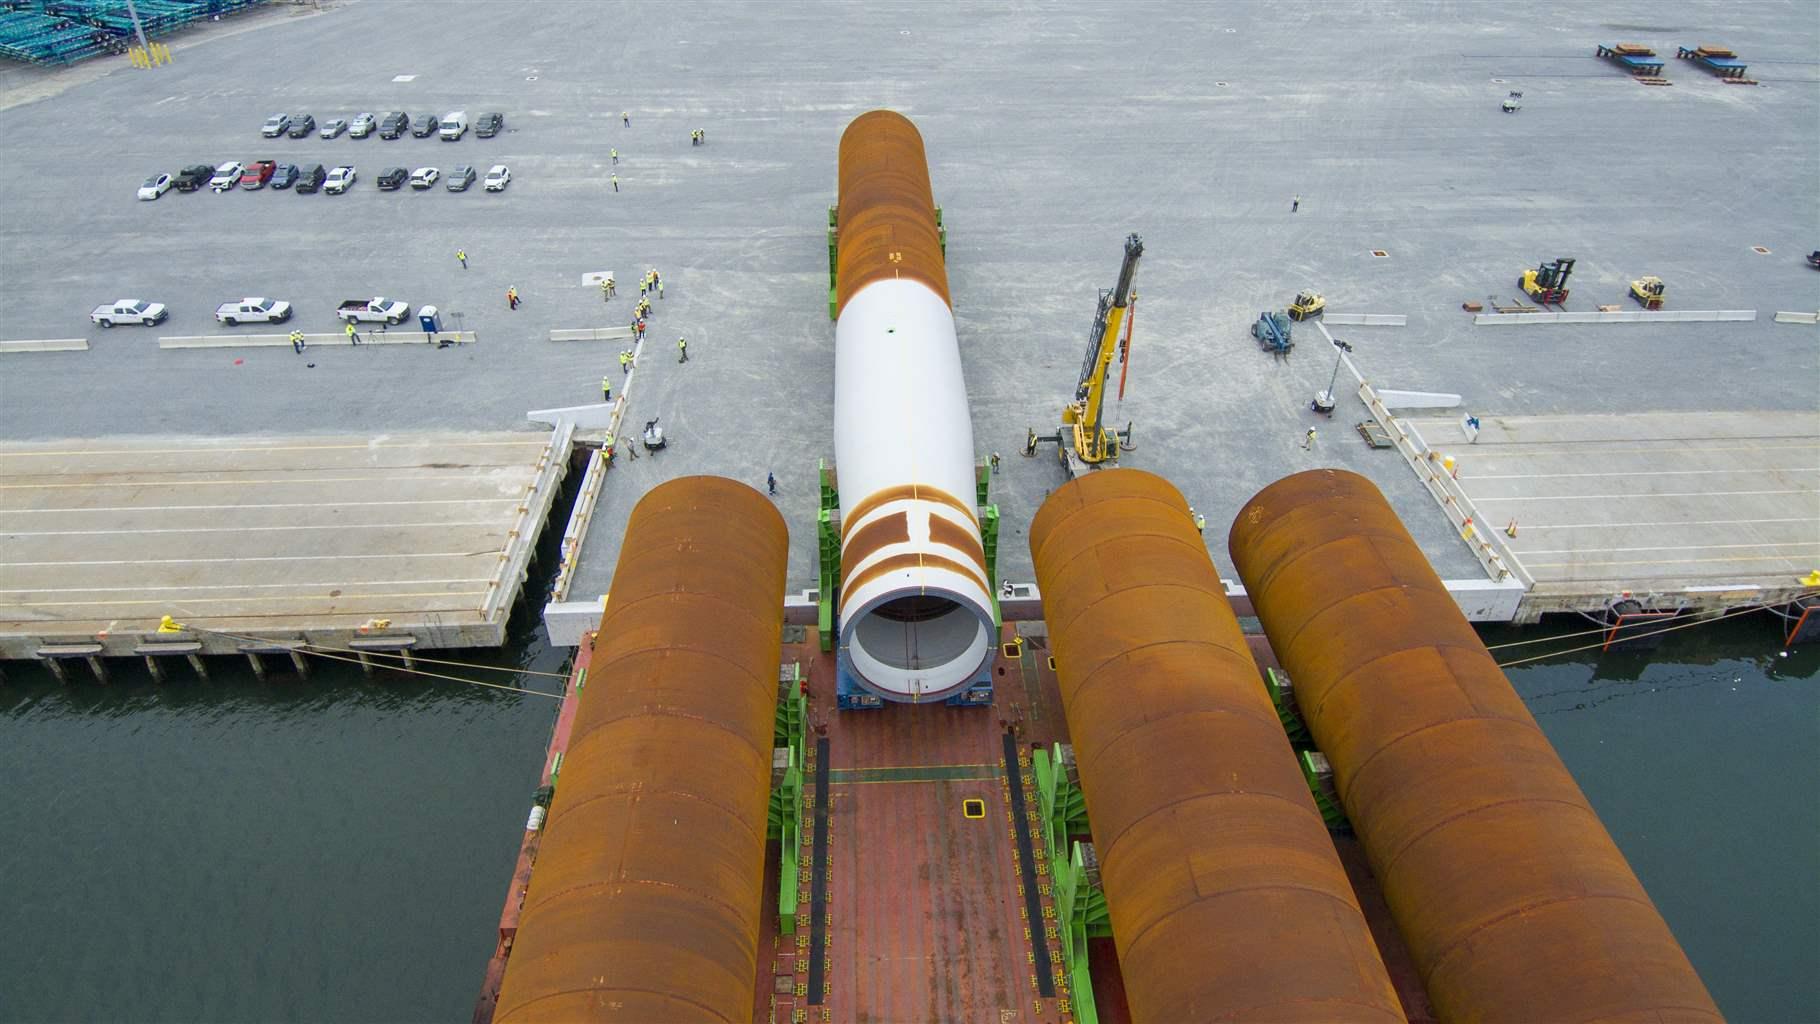 An aerial view of a ship port with four massive orange and white tubes partially on the concrete port and partially over the water. A yellow crane is on the shore ready to help take the large structures off the barge.